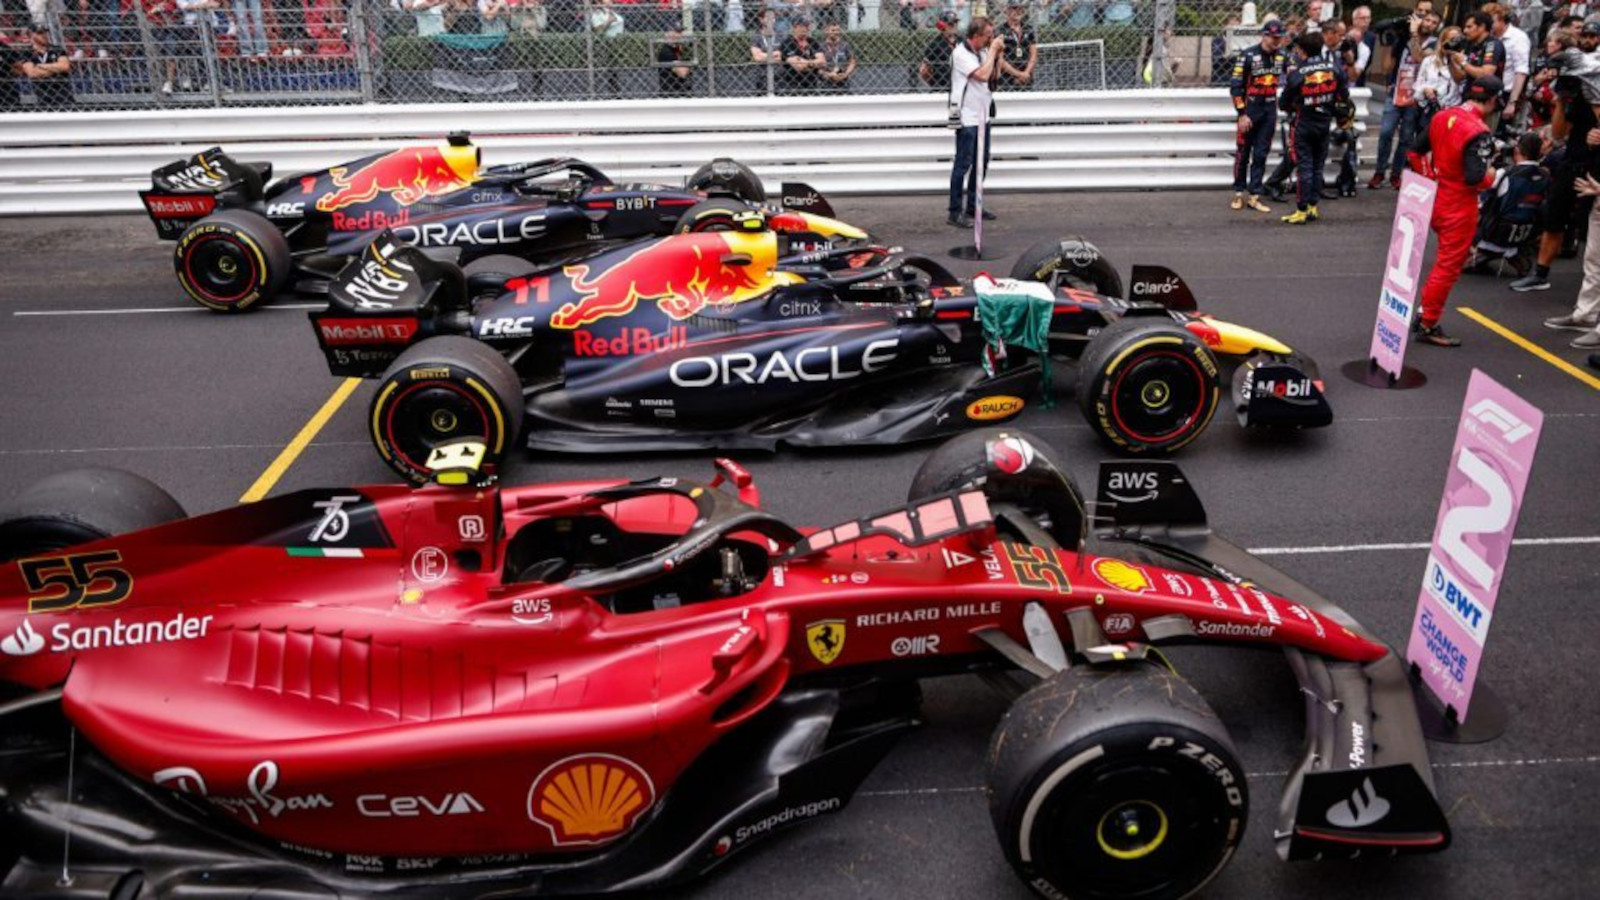 Two Red Bulls and a Ferrari in parc ferme as the podium finishers. Monaco May 2022